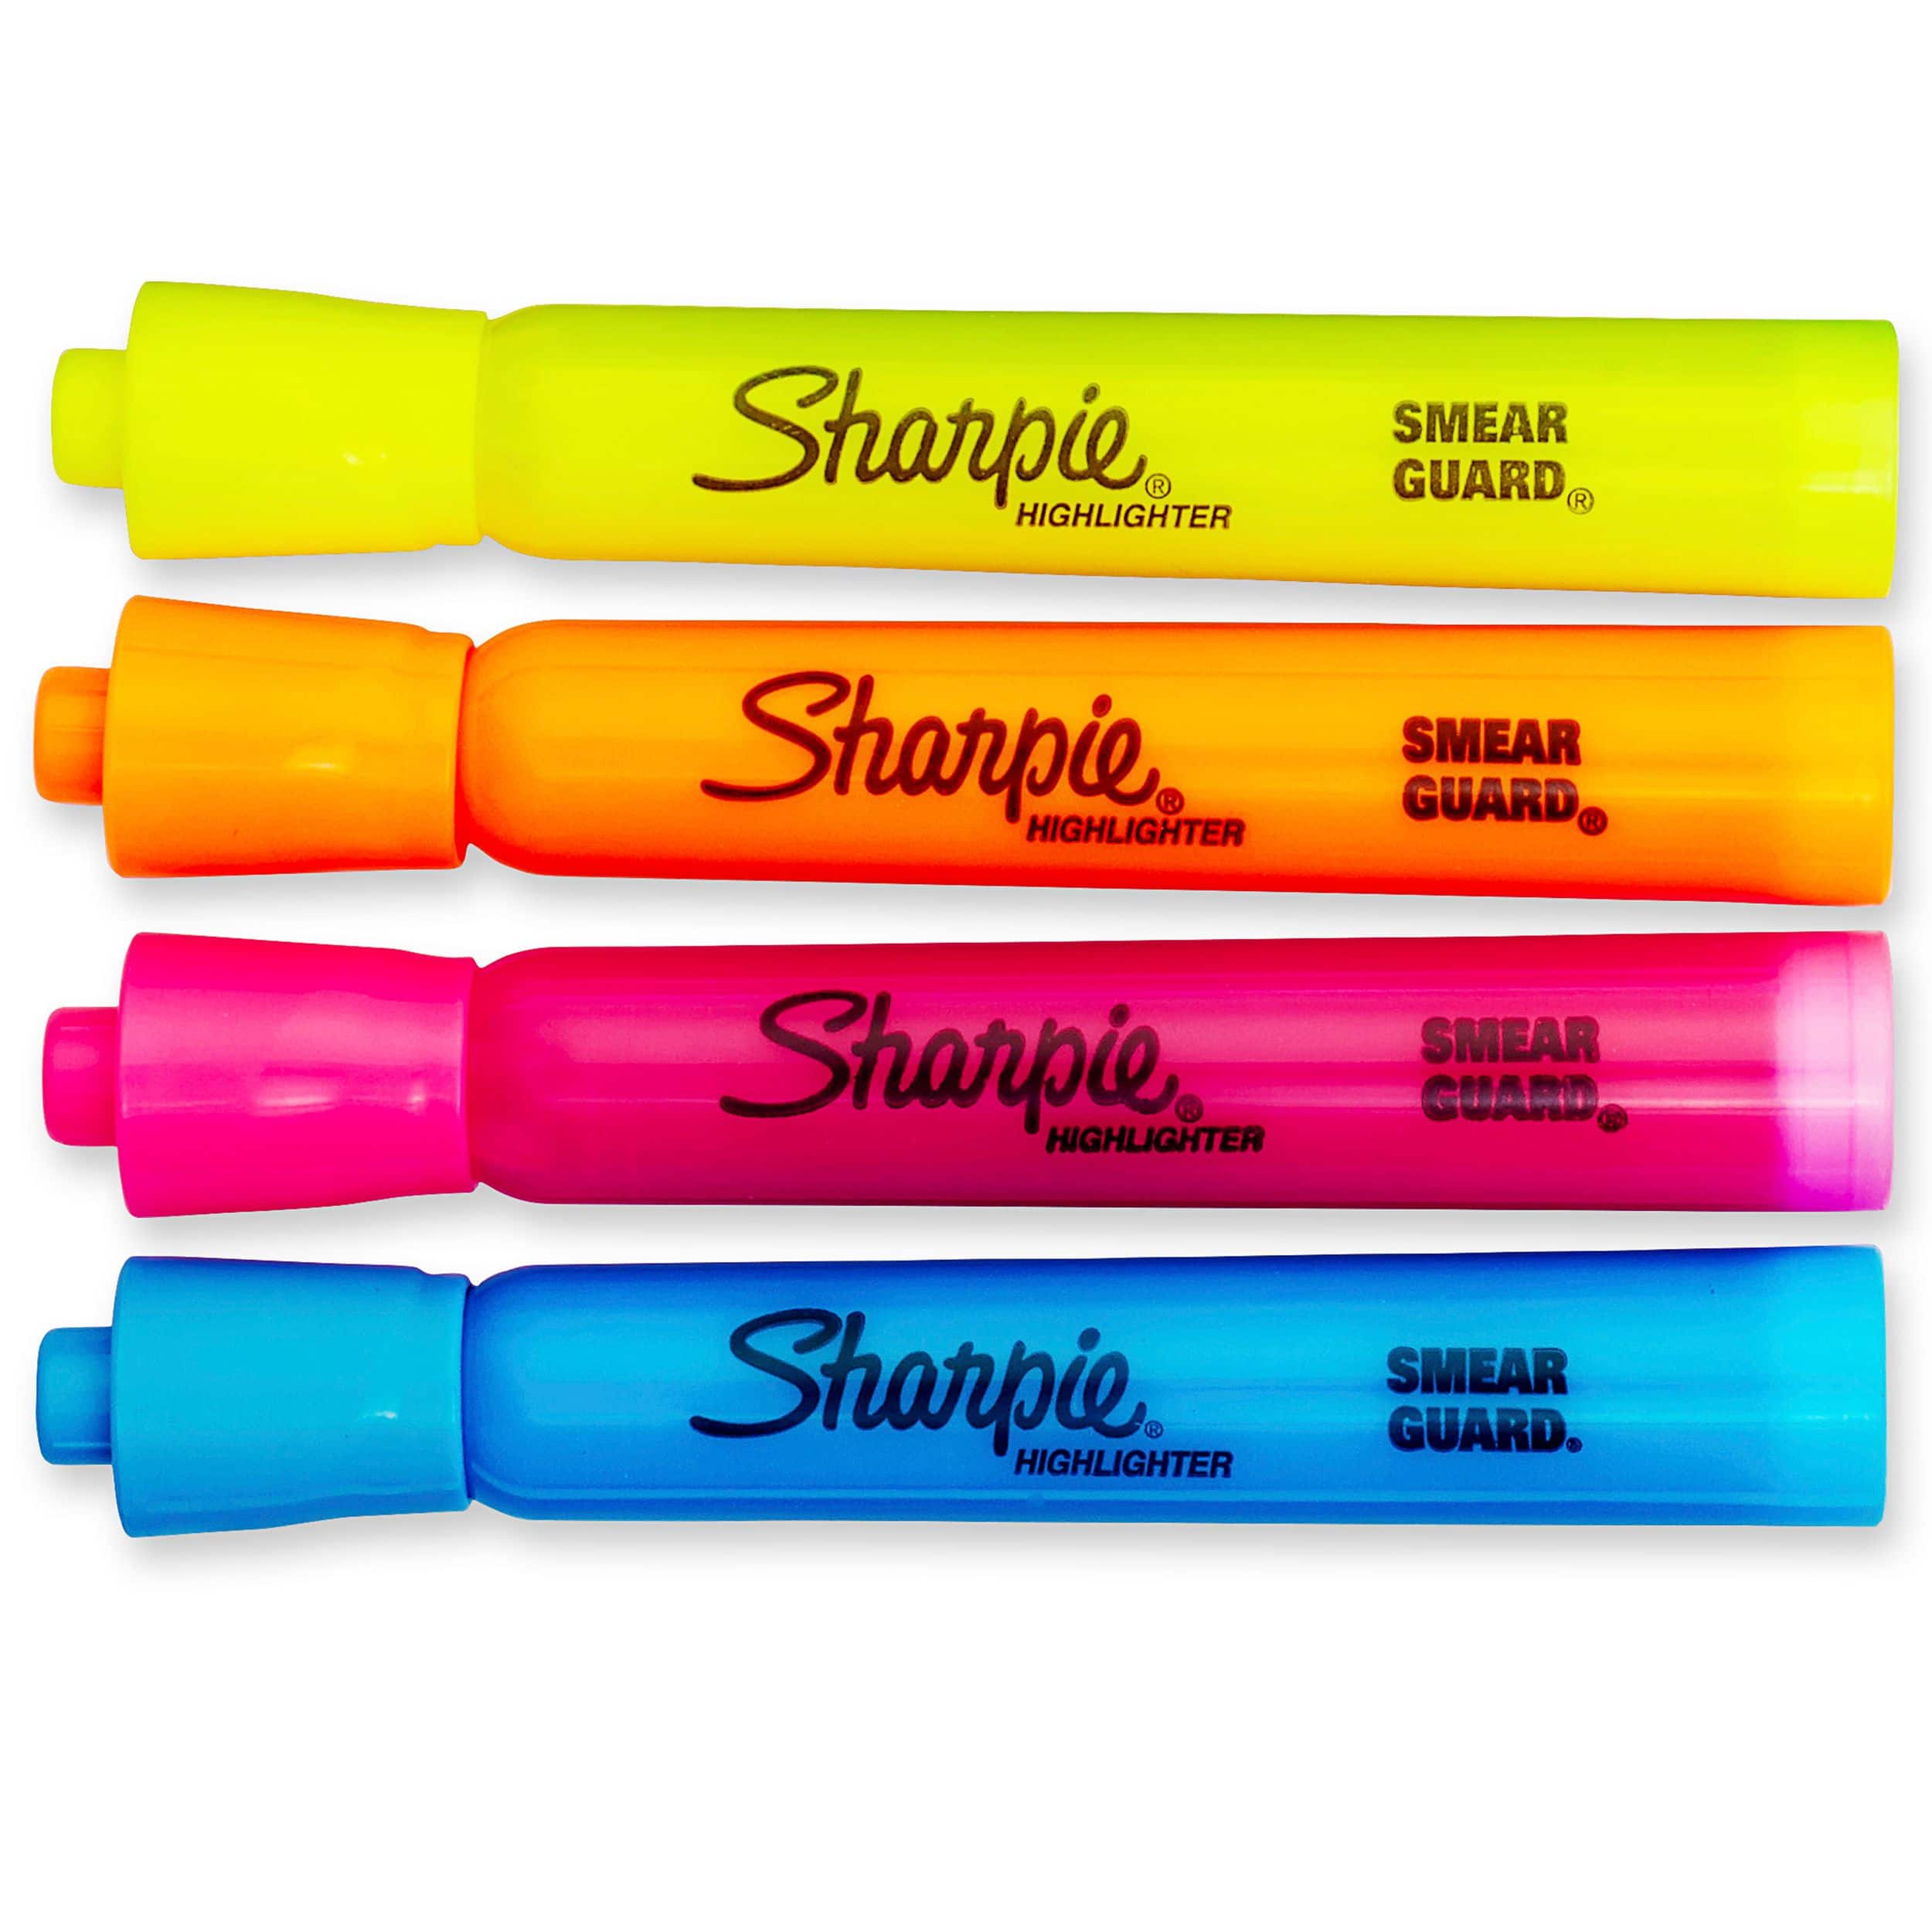 https://media-www.canadiantire.ca/product/seasonal-gardening/toys/home-office-supplies/1424116/sharpie-highlighters-assorted-4-pack-9b824f2a-314d-422d-a76c-99c15d3d8883-jpgrendition.jpg